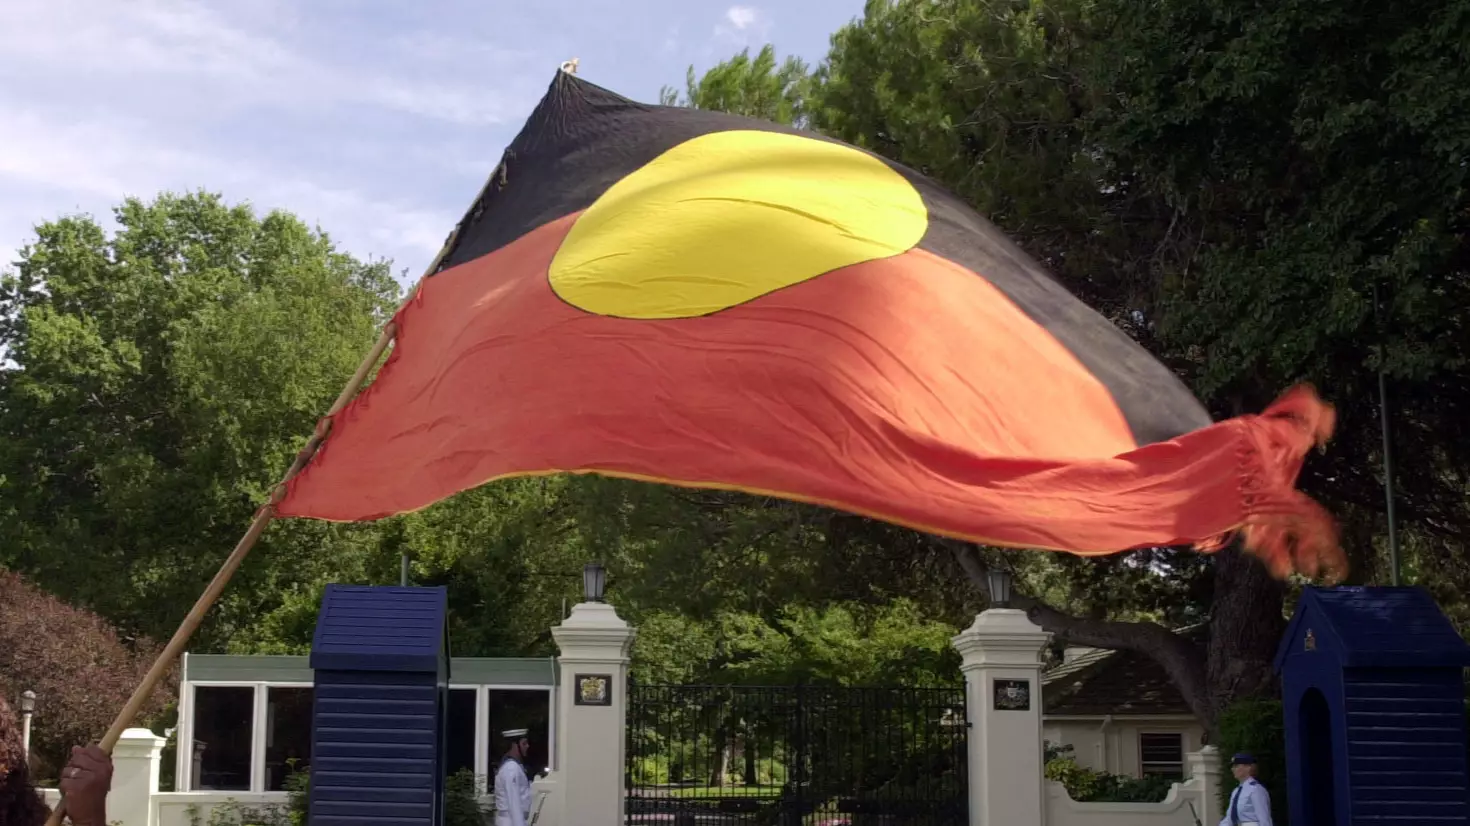 RSL Bans Aboriginal Flag And Welcome To Country At Two Services In Western Australia